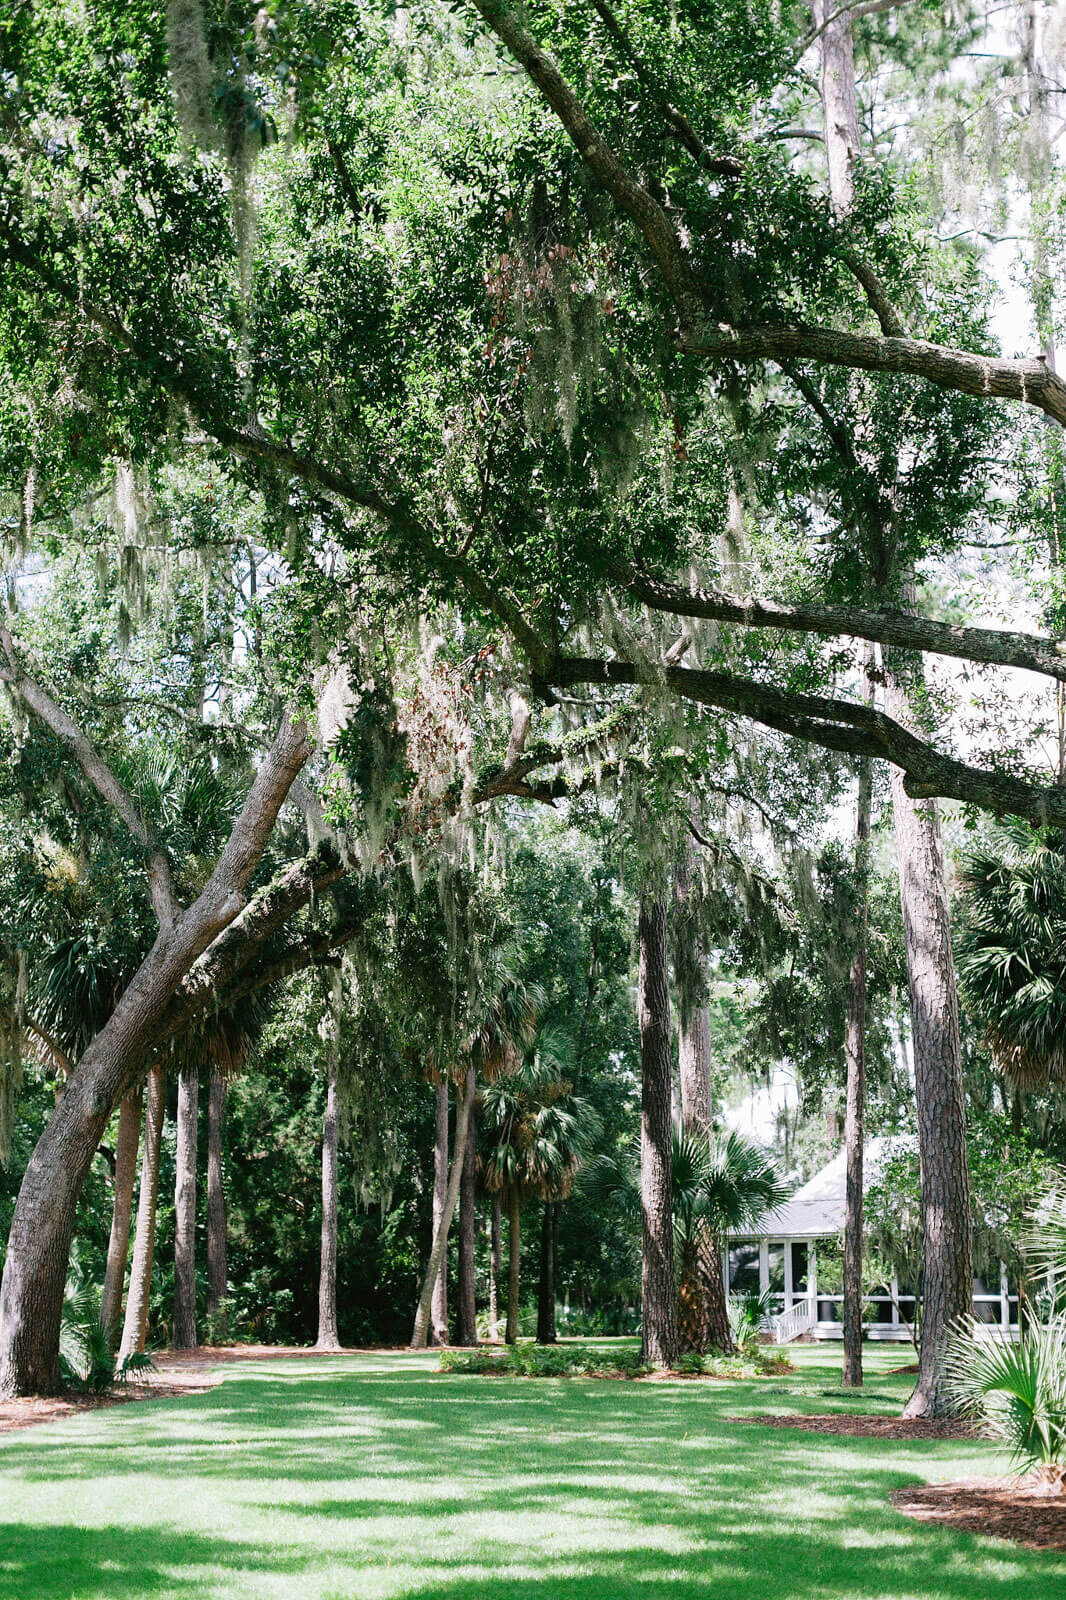 Beautiful trees and green grass in Montage at Palmetto Bluff. Destination wedding image by Jenny Fu Studio